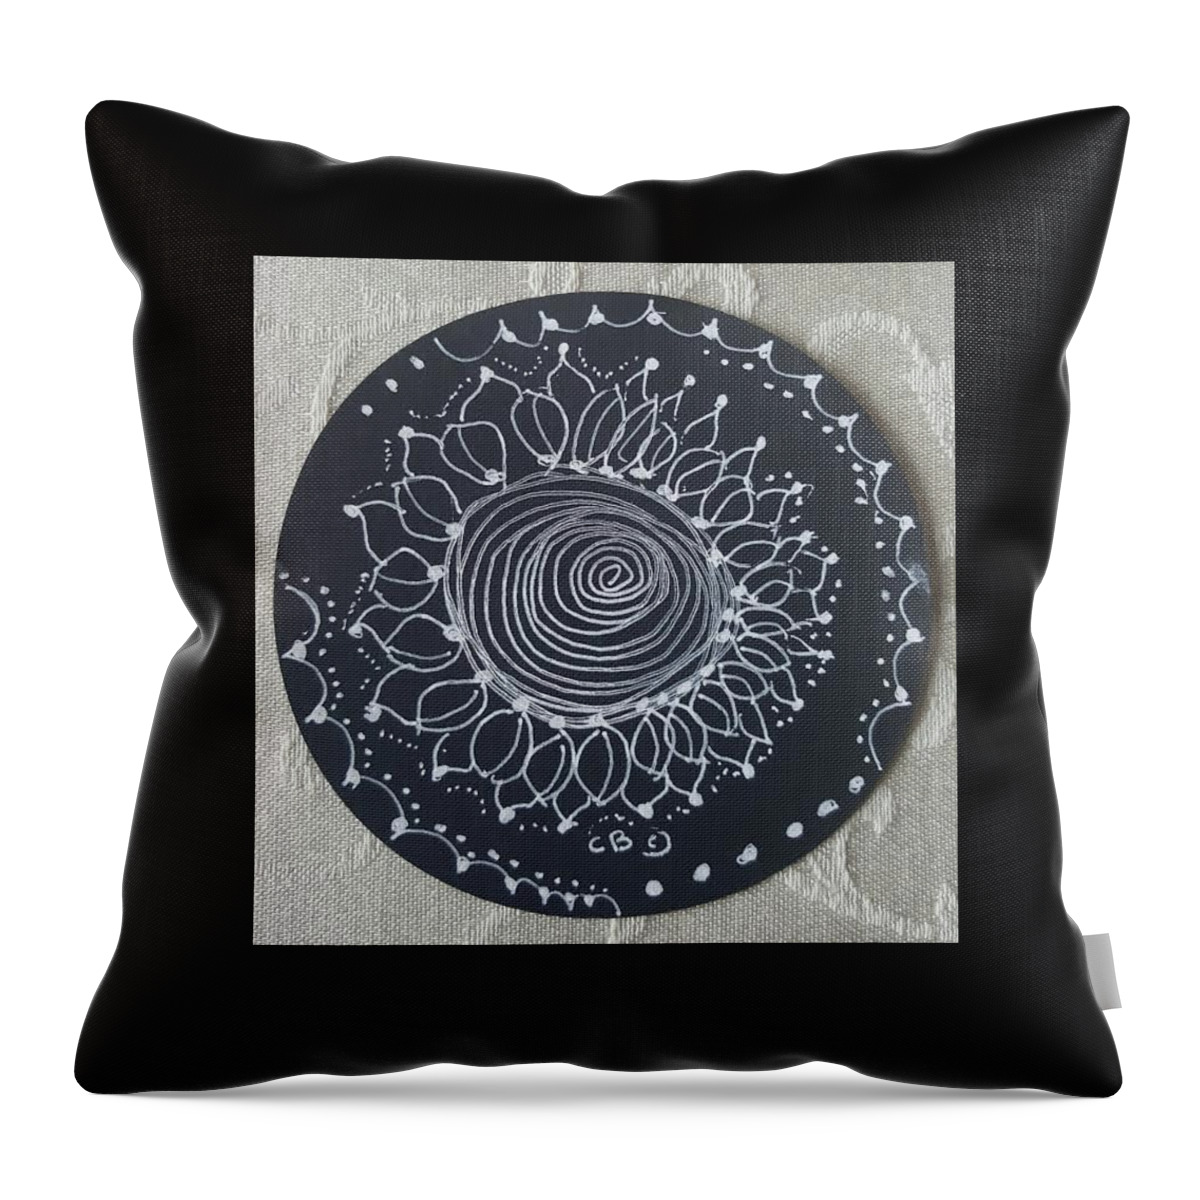 Zentangle Throw Pillow featuring the drawing Sunshine by Carole Brecht